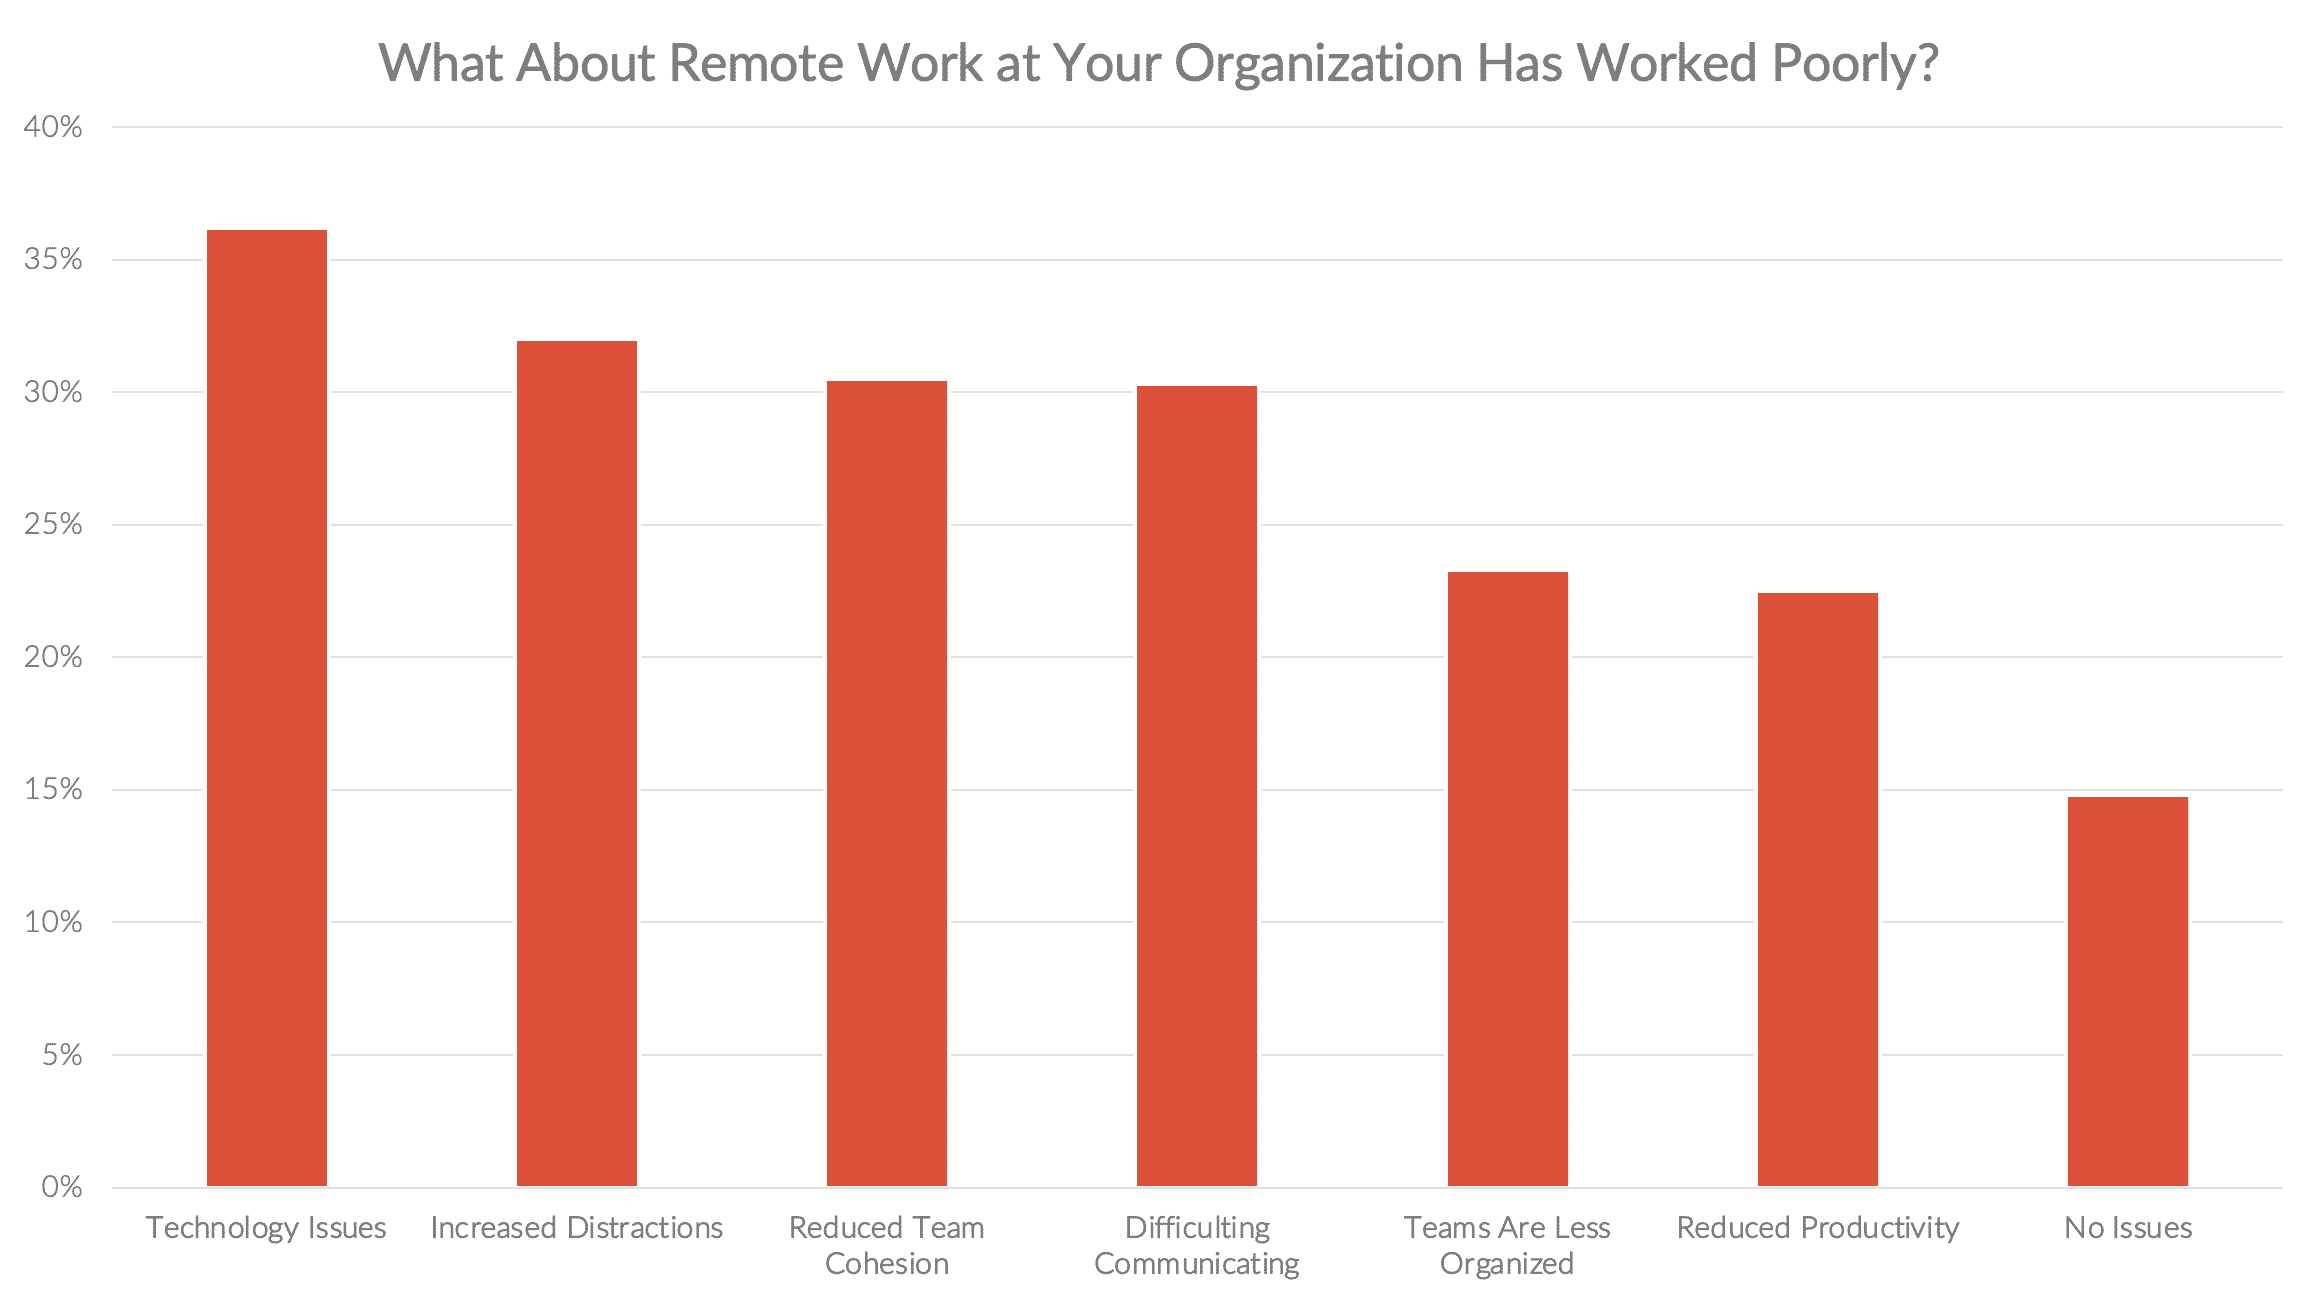 Bar chart depicting technology issues as top challenge for remote workers